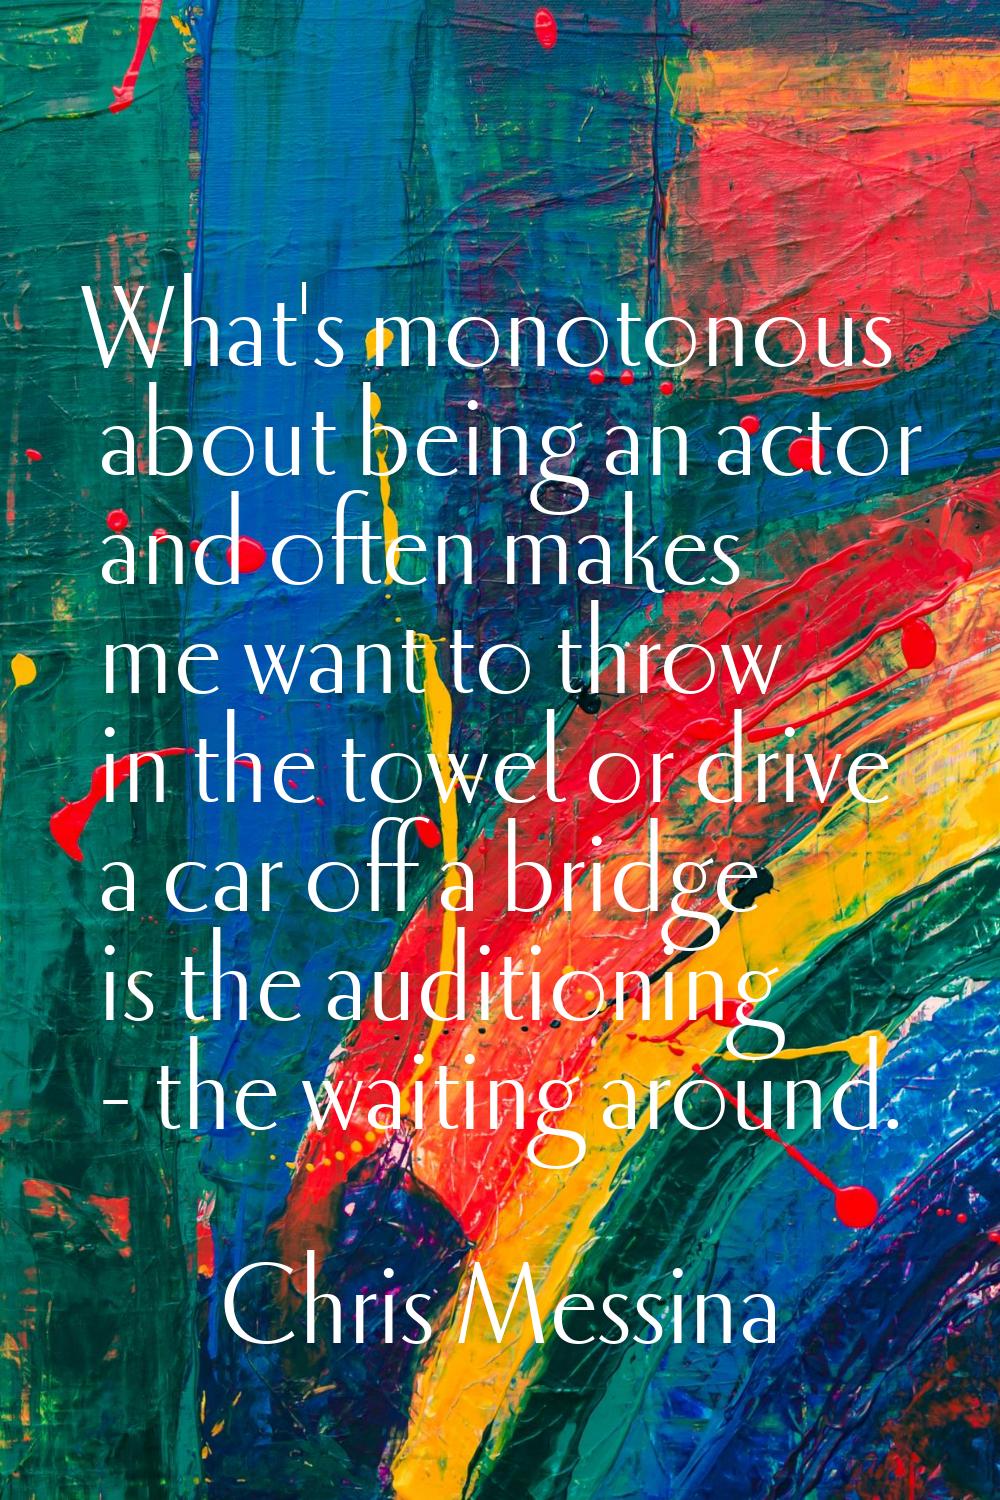 What's monotonous about being an actor and often makes me want to throw in the towel or drive a car